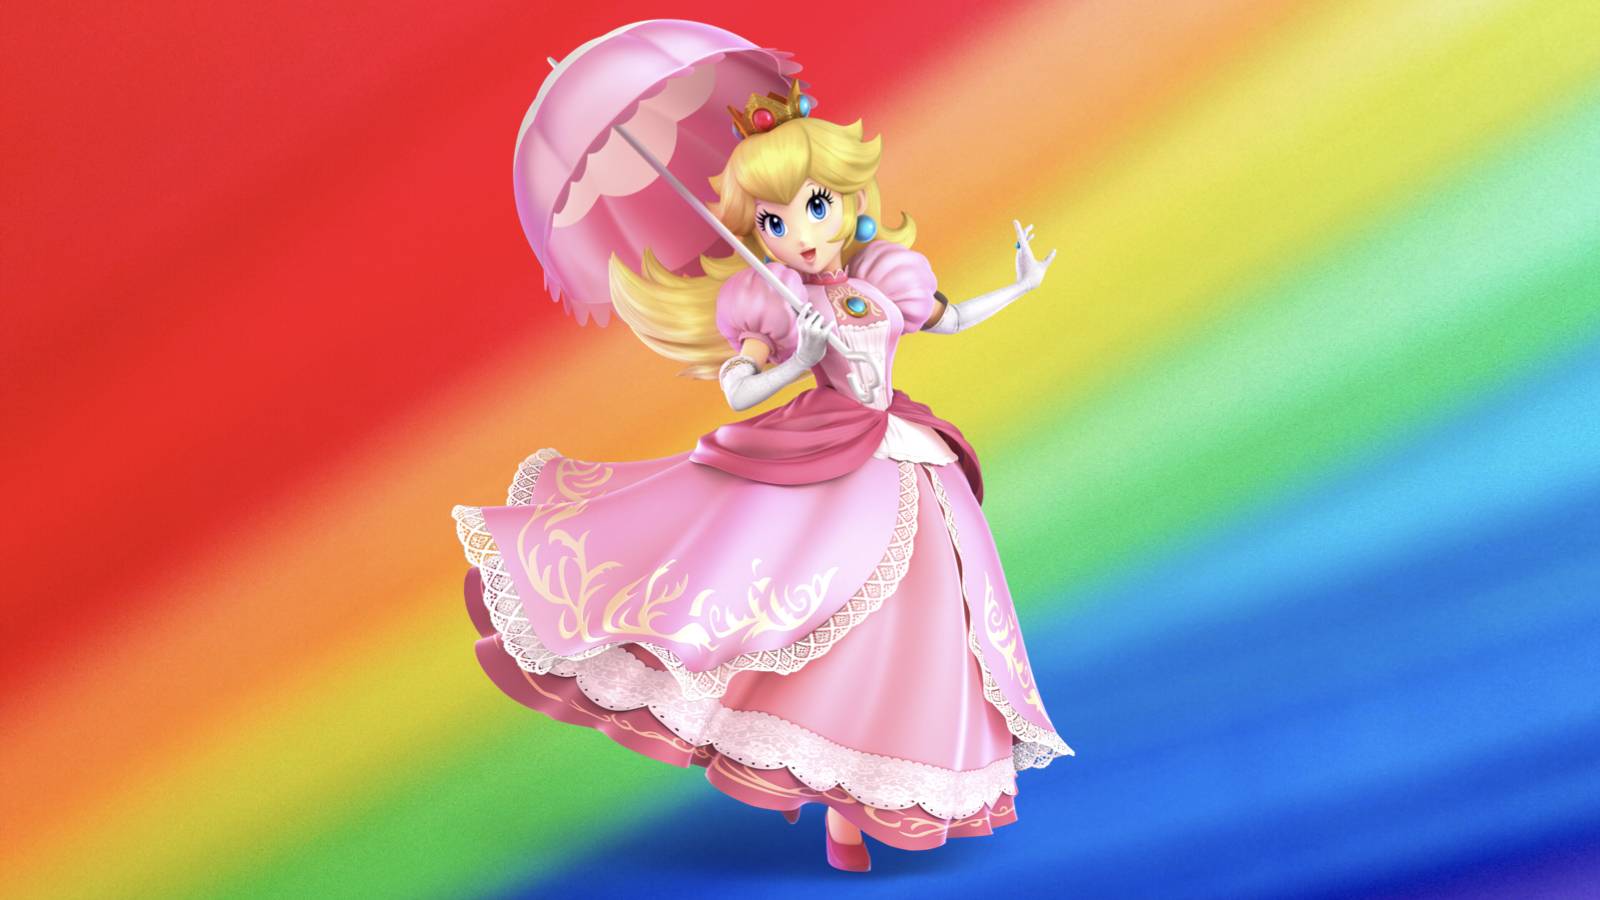 Princess Peach stands in front of a rainbow background, holding a pink parasol. - Princess Peach